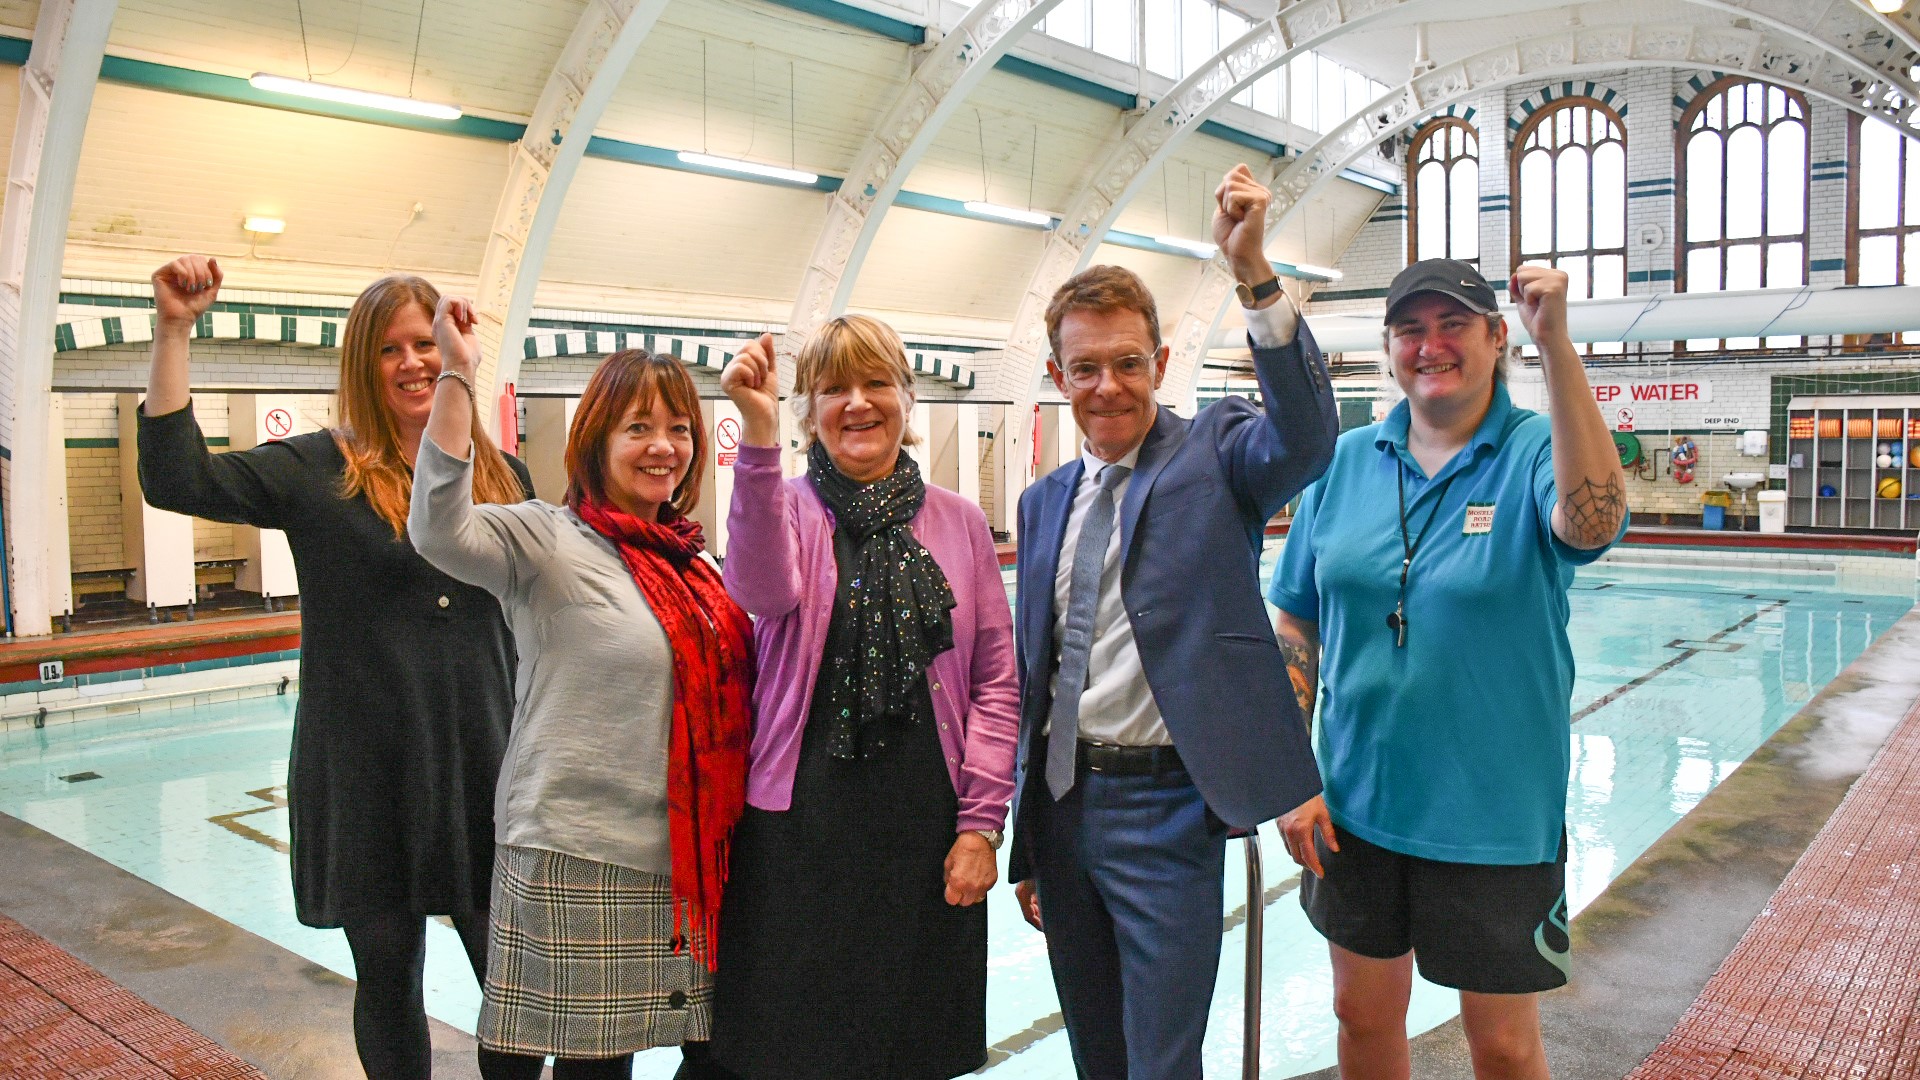 L-R Kat Pearson, trustee at Moseley Road Baths CIO, Carole Donnelly and Gillian Morbey, co-chairs of the Social Economy Taskforce, Mayor of the West Midlands Andy Street and Viv Harrison, general manager of Moseley Road Baths